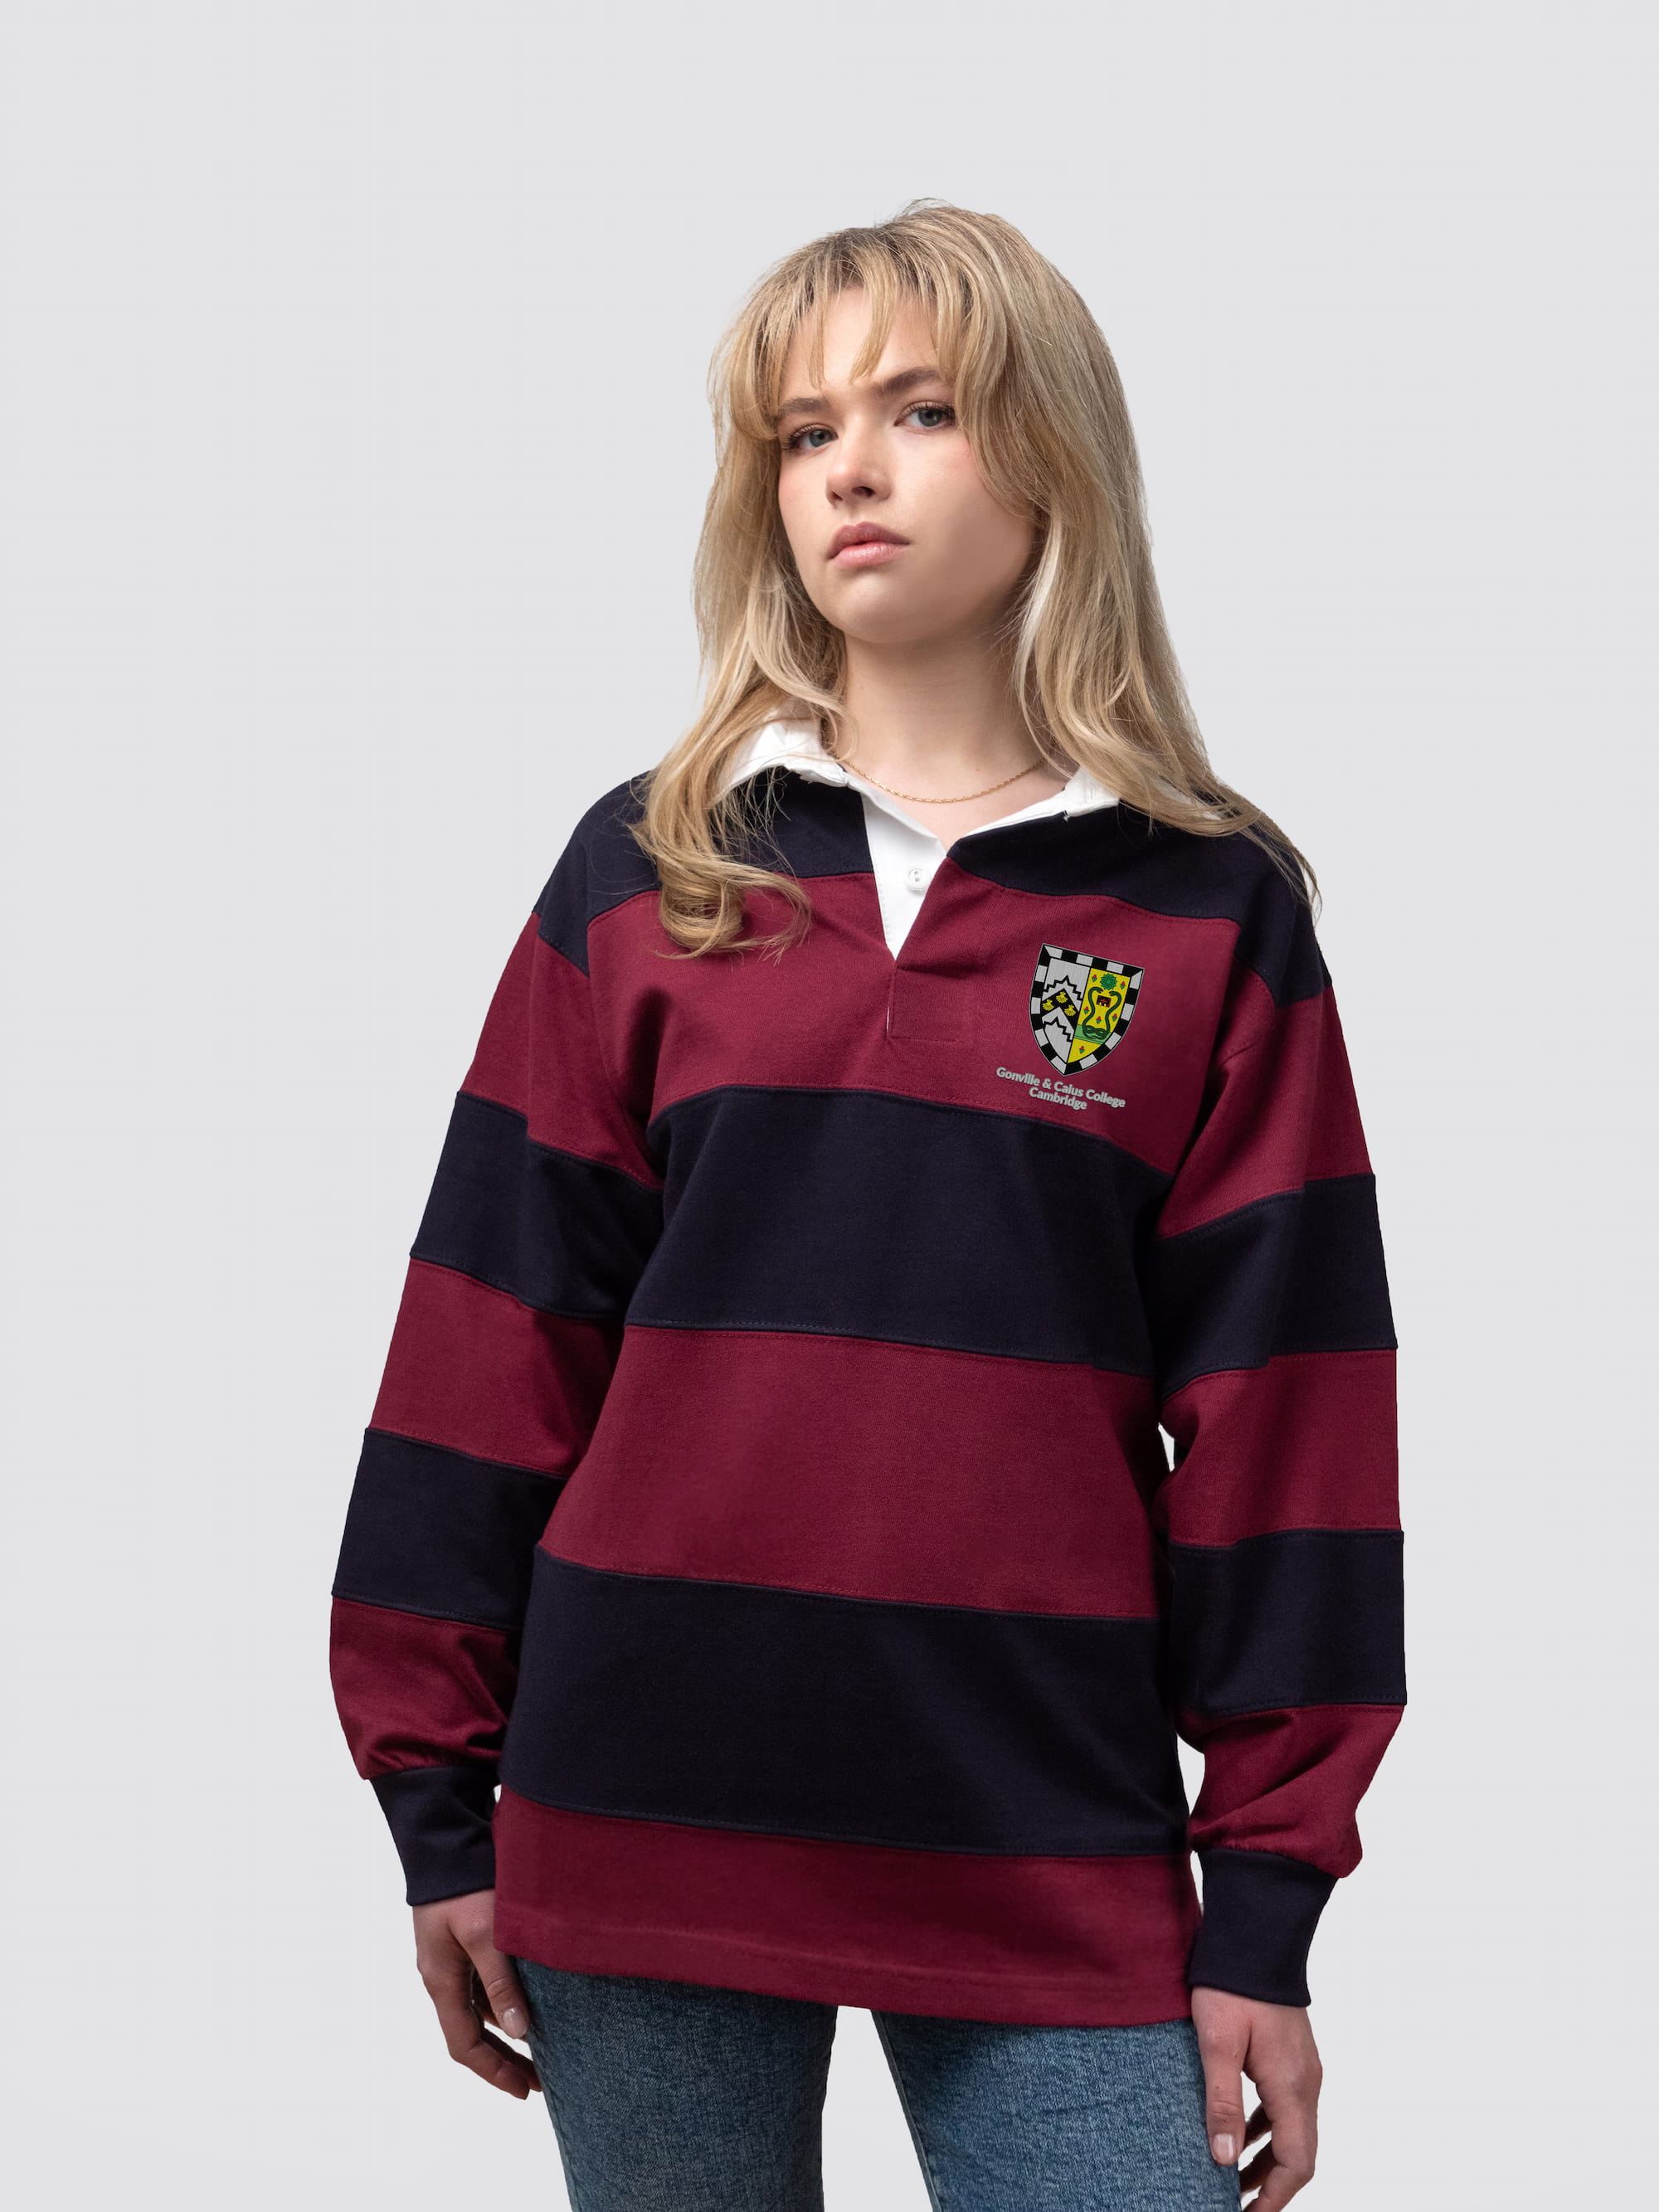 Gonville & Caius College rugby shirt, with burgundy and navy stripes